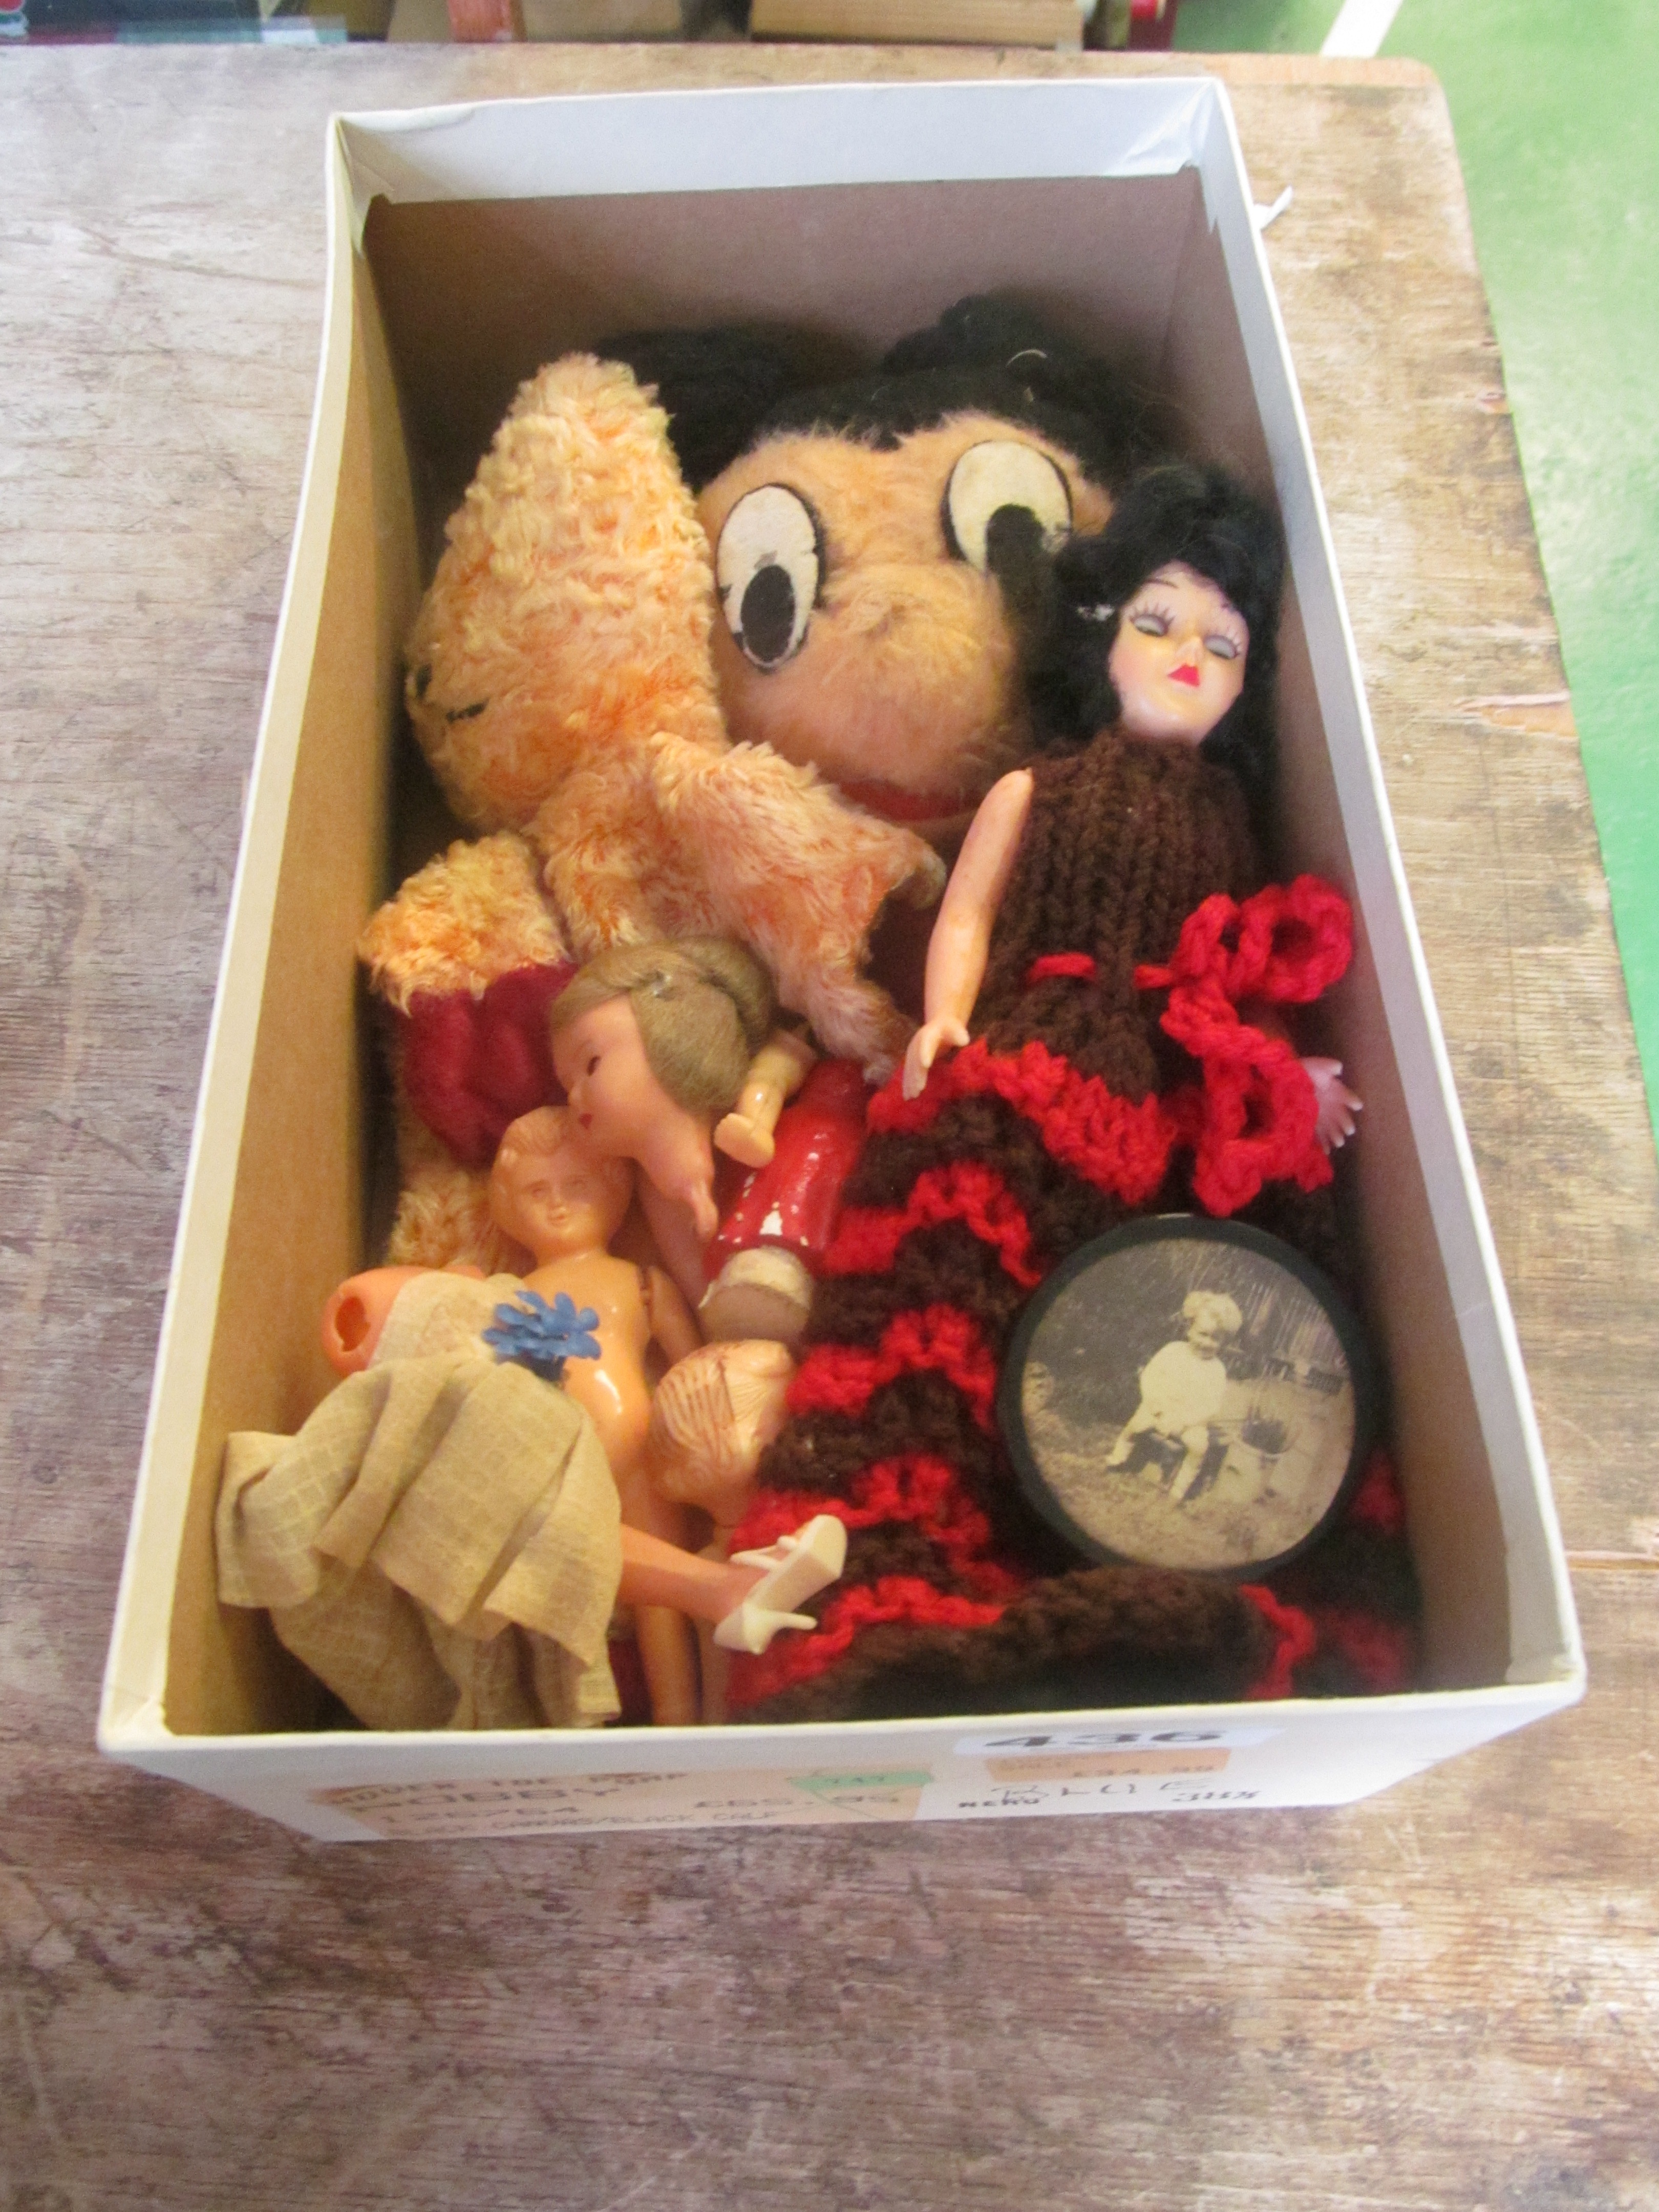 A Mickey Mouse puppet and other dolls.